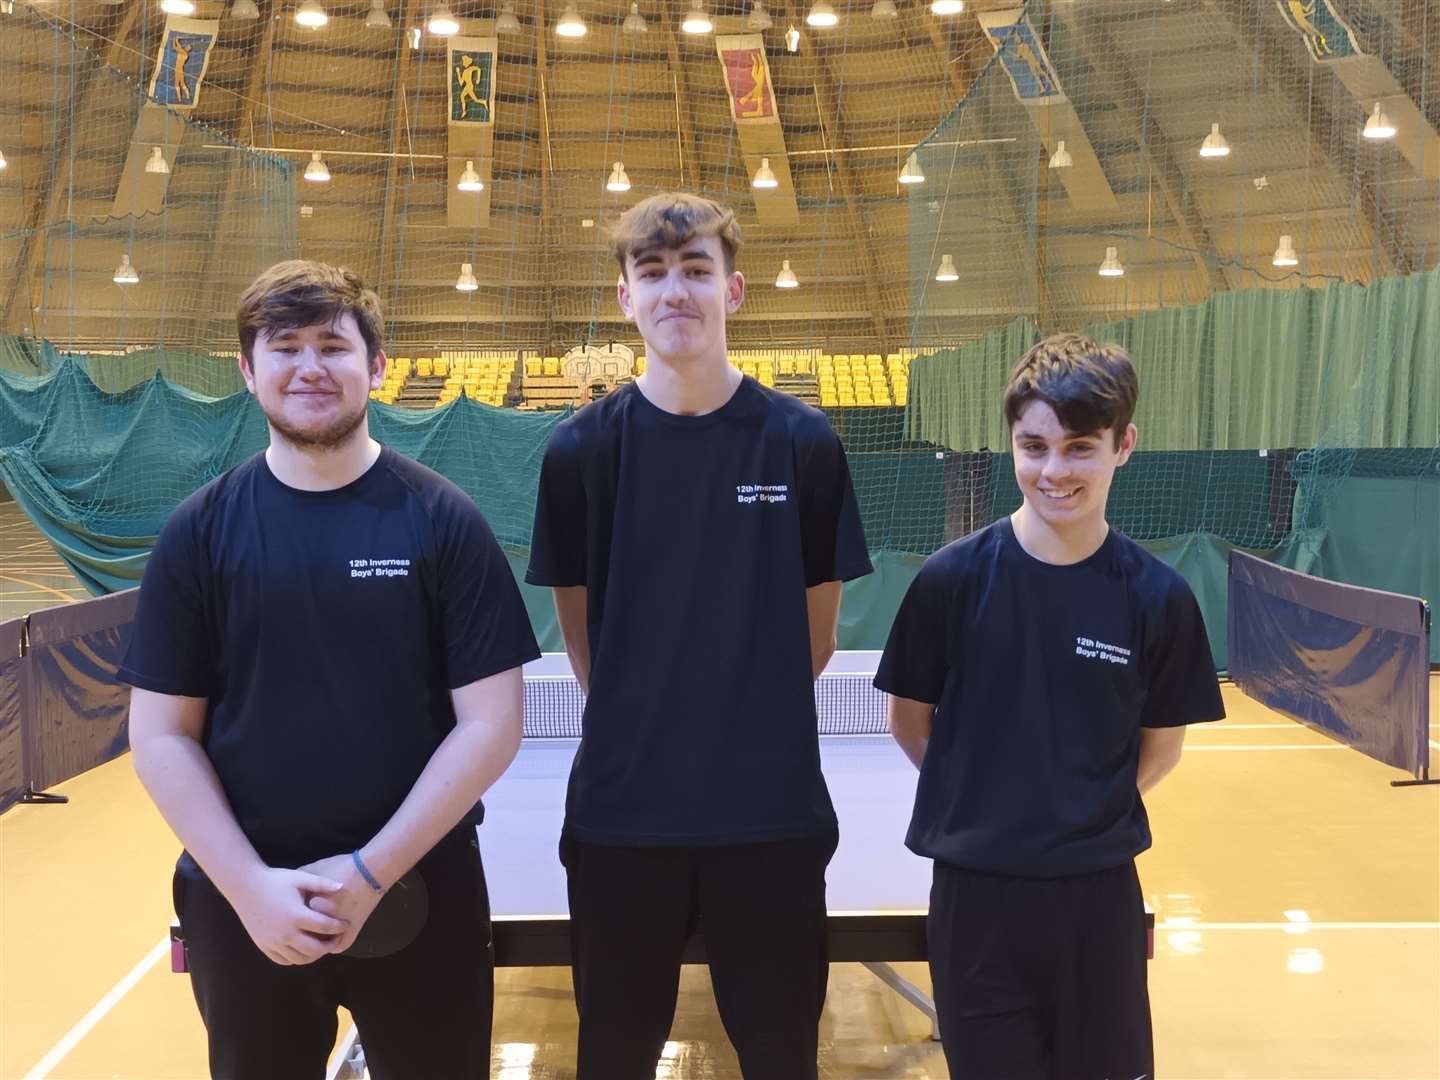 The 12th Inverness Boys Brigade table tennis team who have made it to the national final - (l-r) DJ Aitken, Alastair Bain and Maddex Reid.